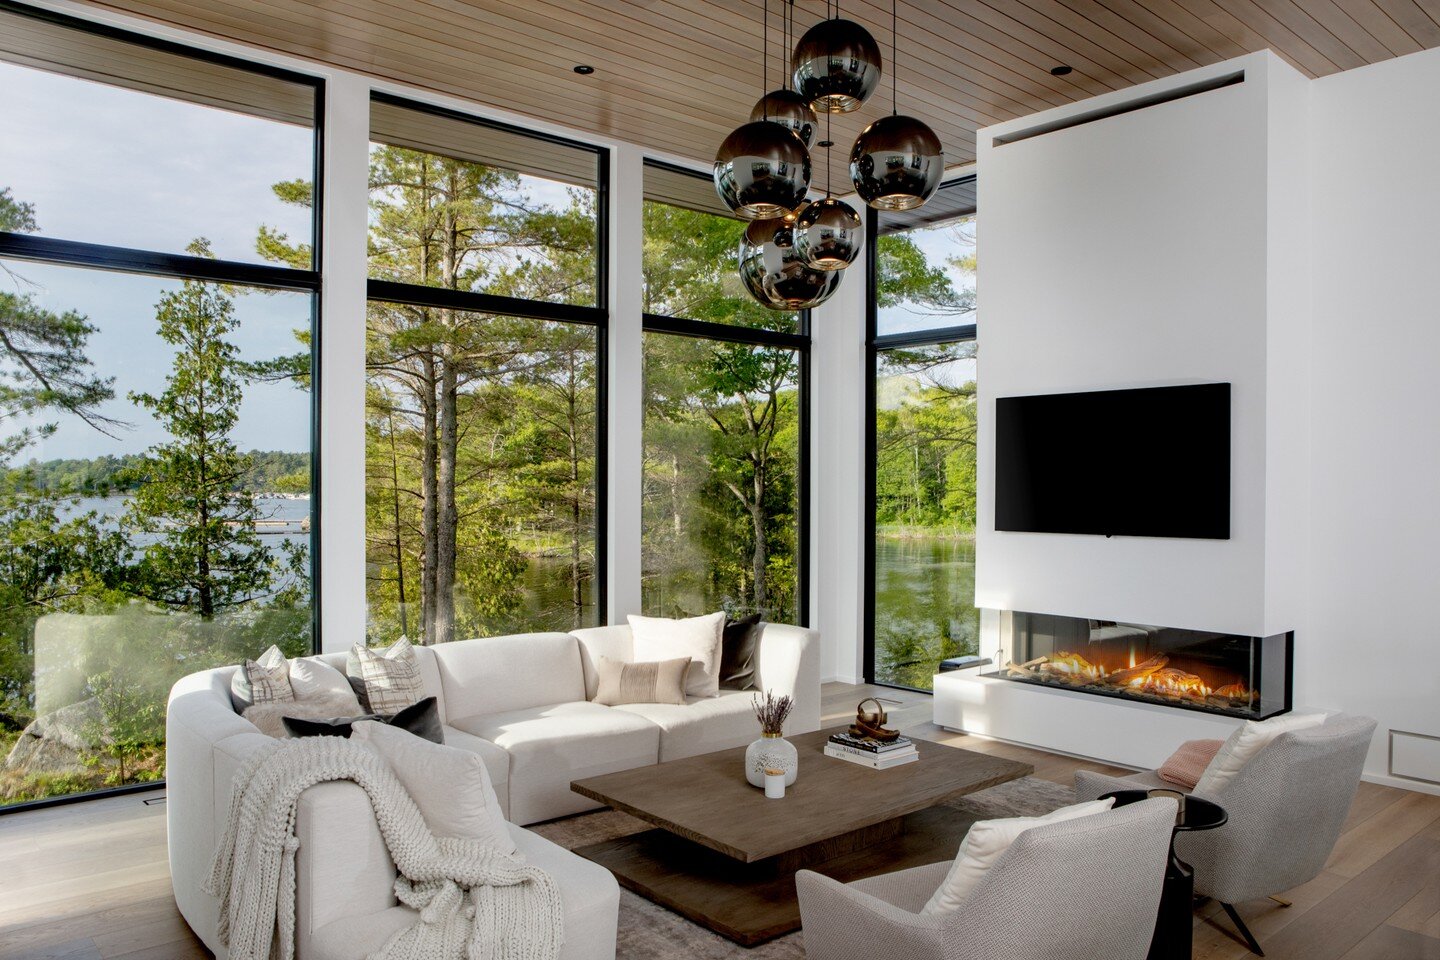 Contemporary living space with a spectacular view!